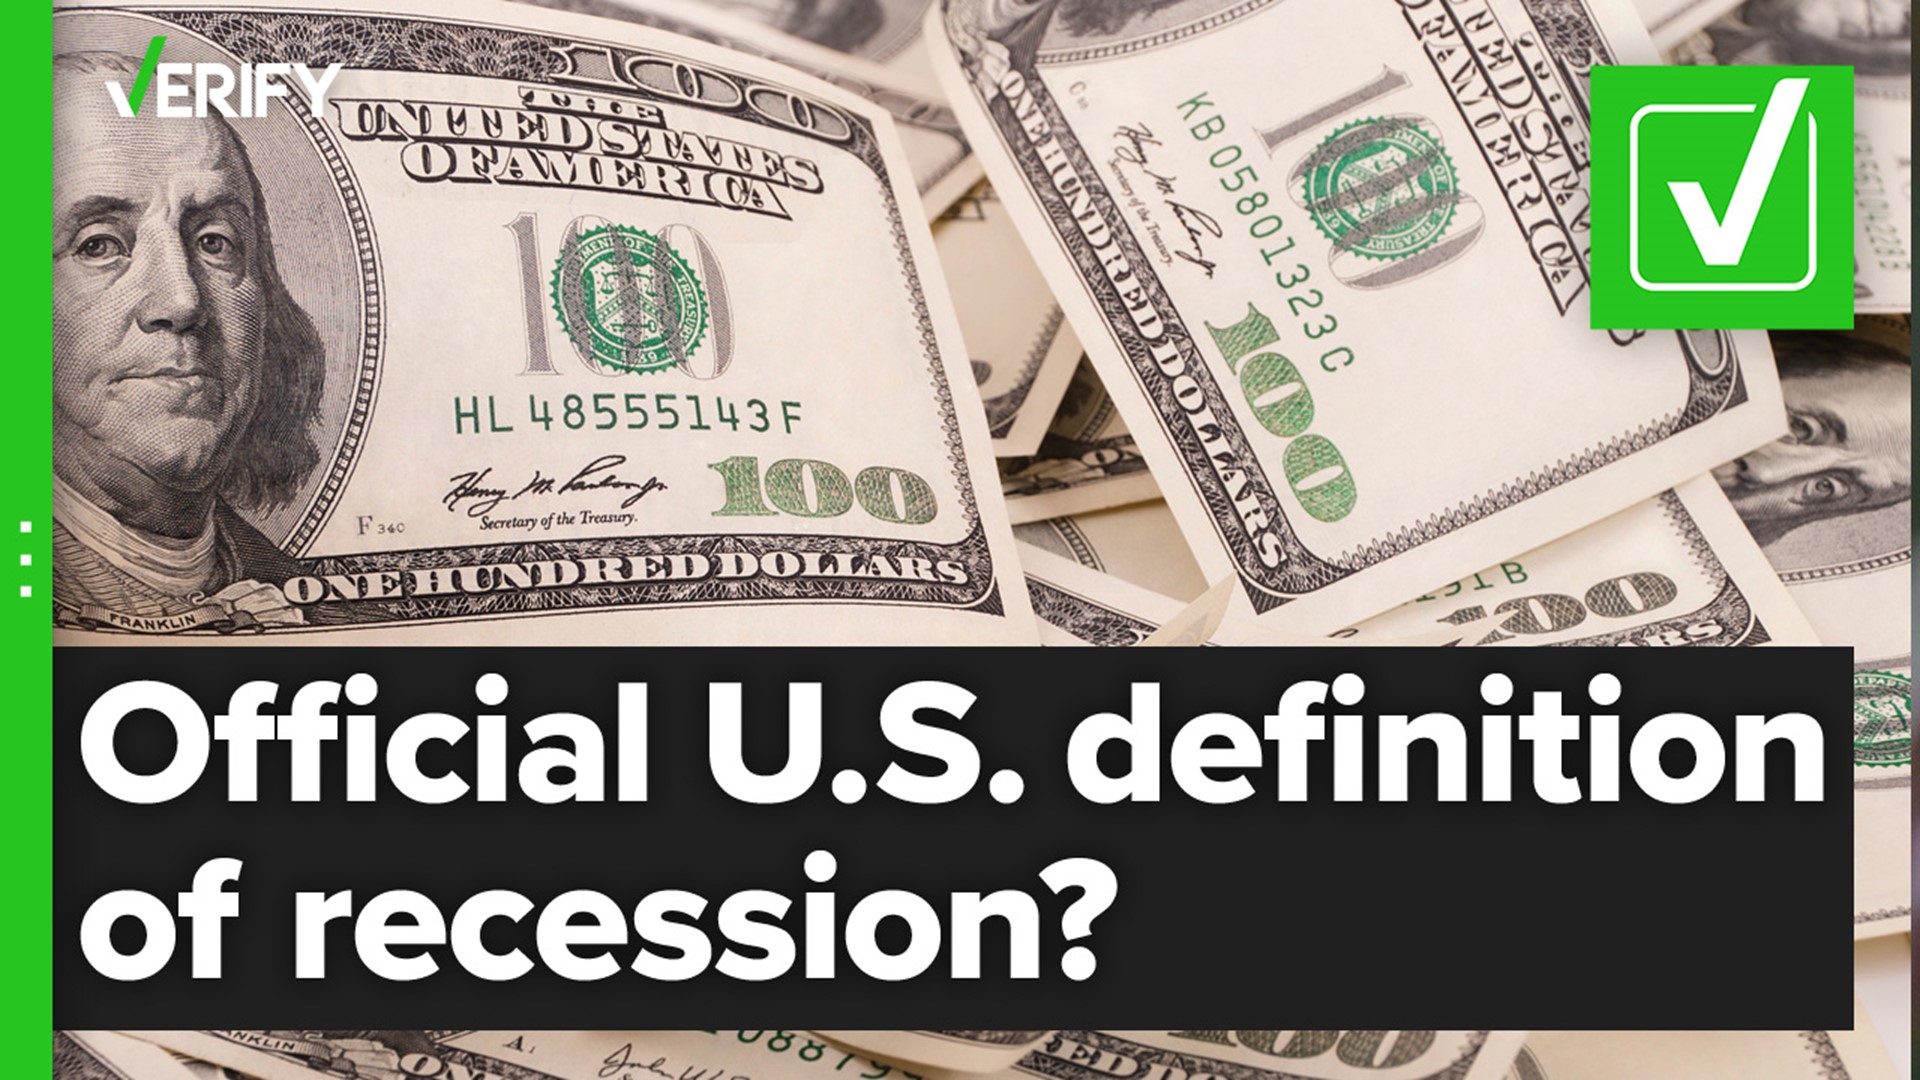 Though some people claim two consecutive quarters of GDP decline constitutes a recession, that's not the official definition in the U.S.